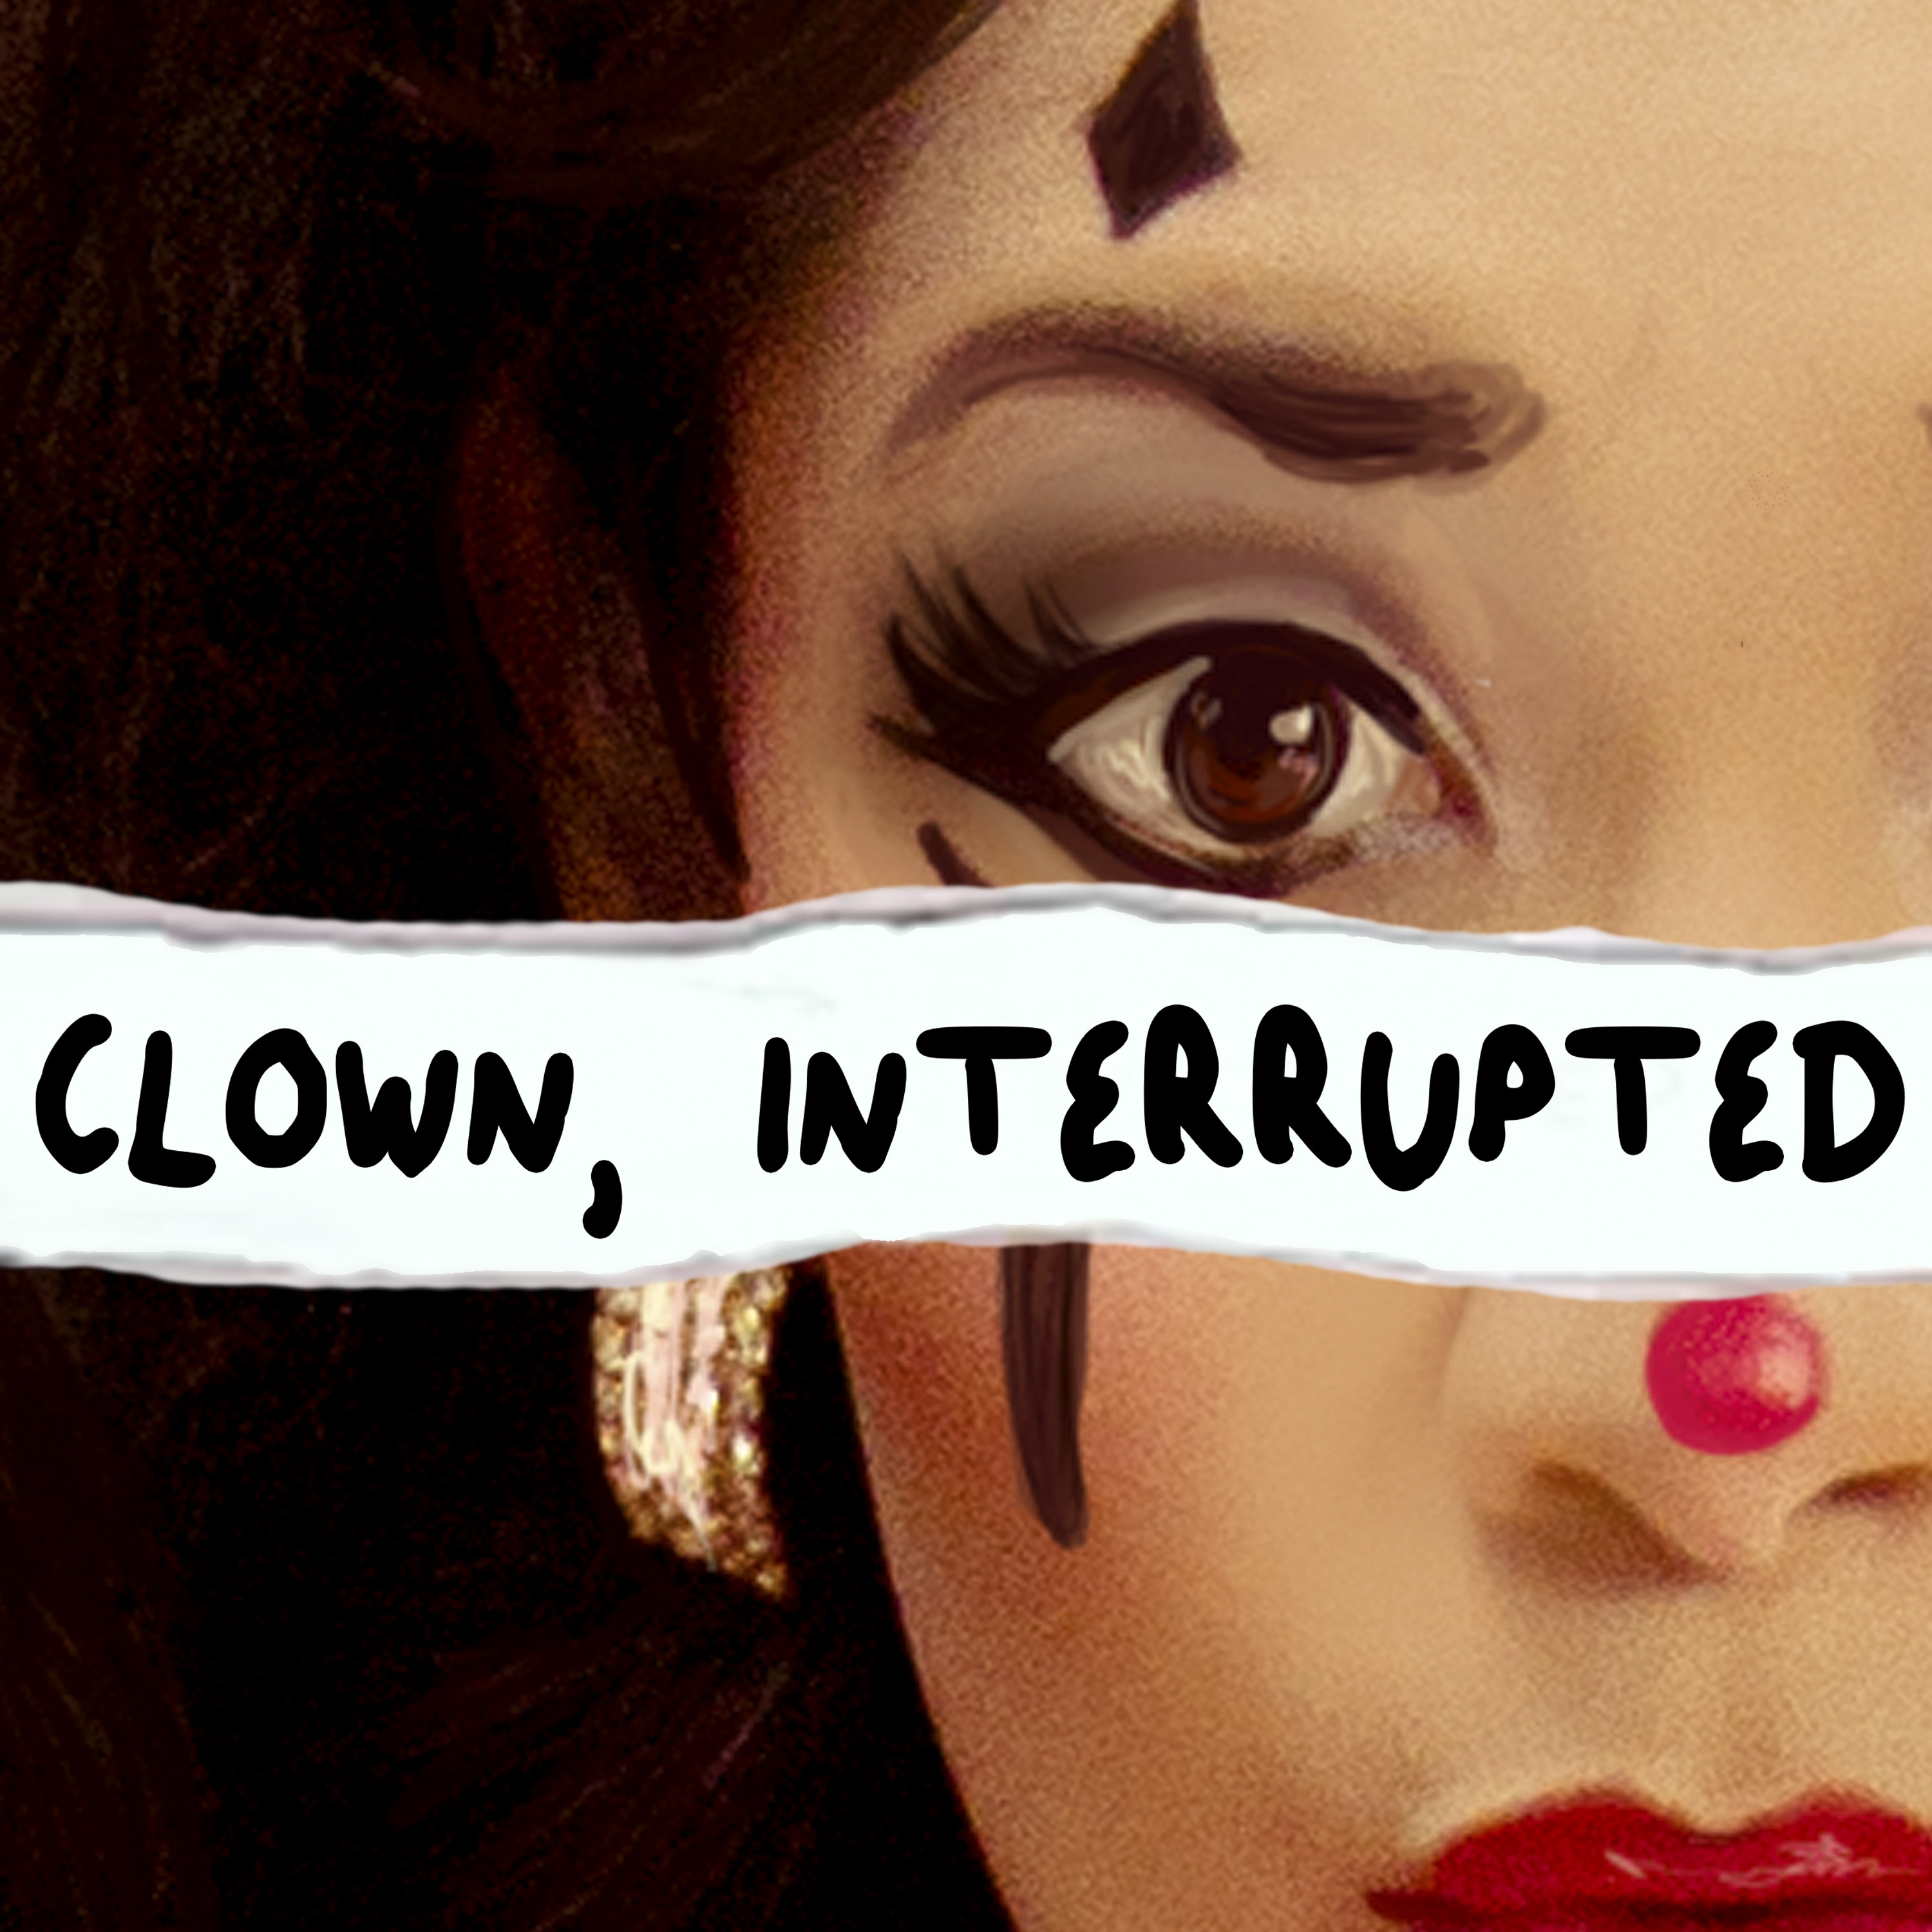 KiKi Maroon talks about being a sober showgirl on the Clown, Interrupted podcast